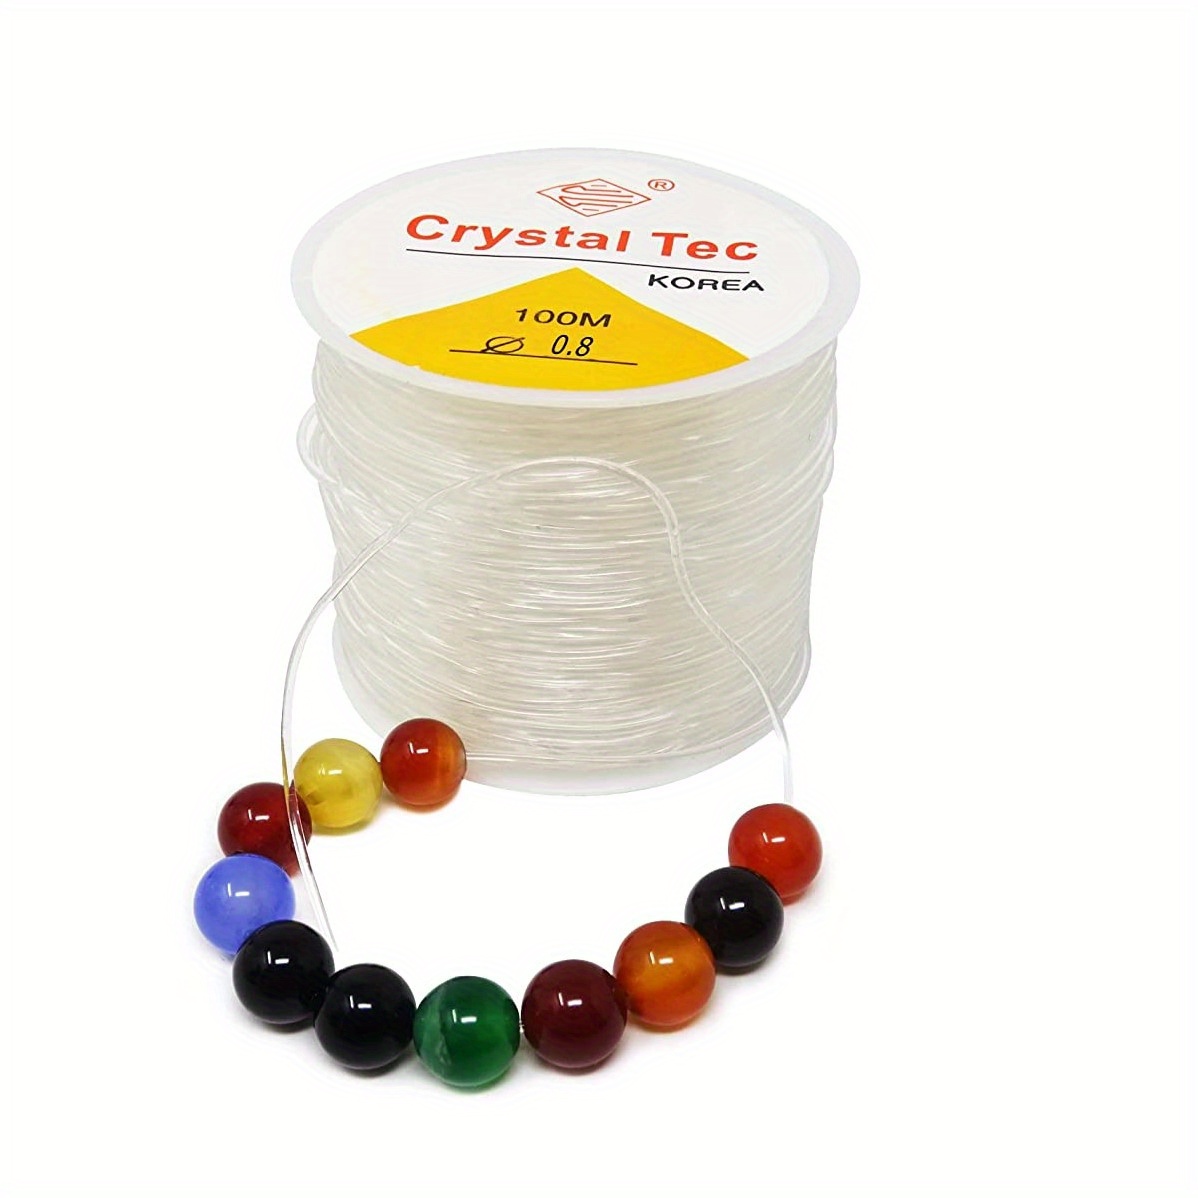 0.8mm*3937.01inch Jewelry Making String, Clear Elastic Beading Threads  Elastic Stretch String For Jewelry Making, Bracelet, Beading, Crystal, Arts  & C